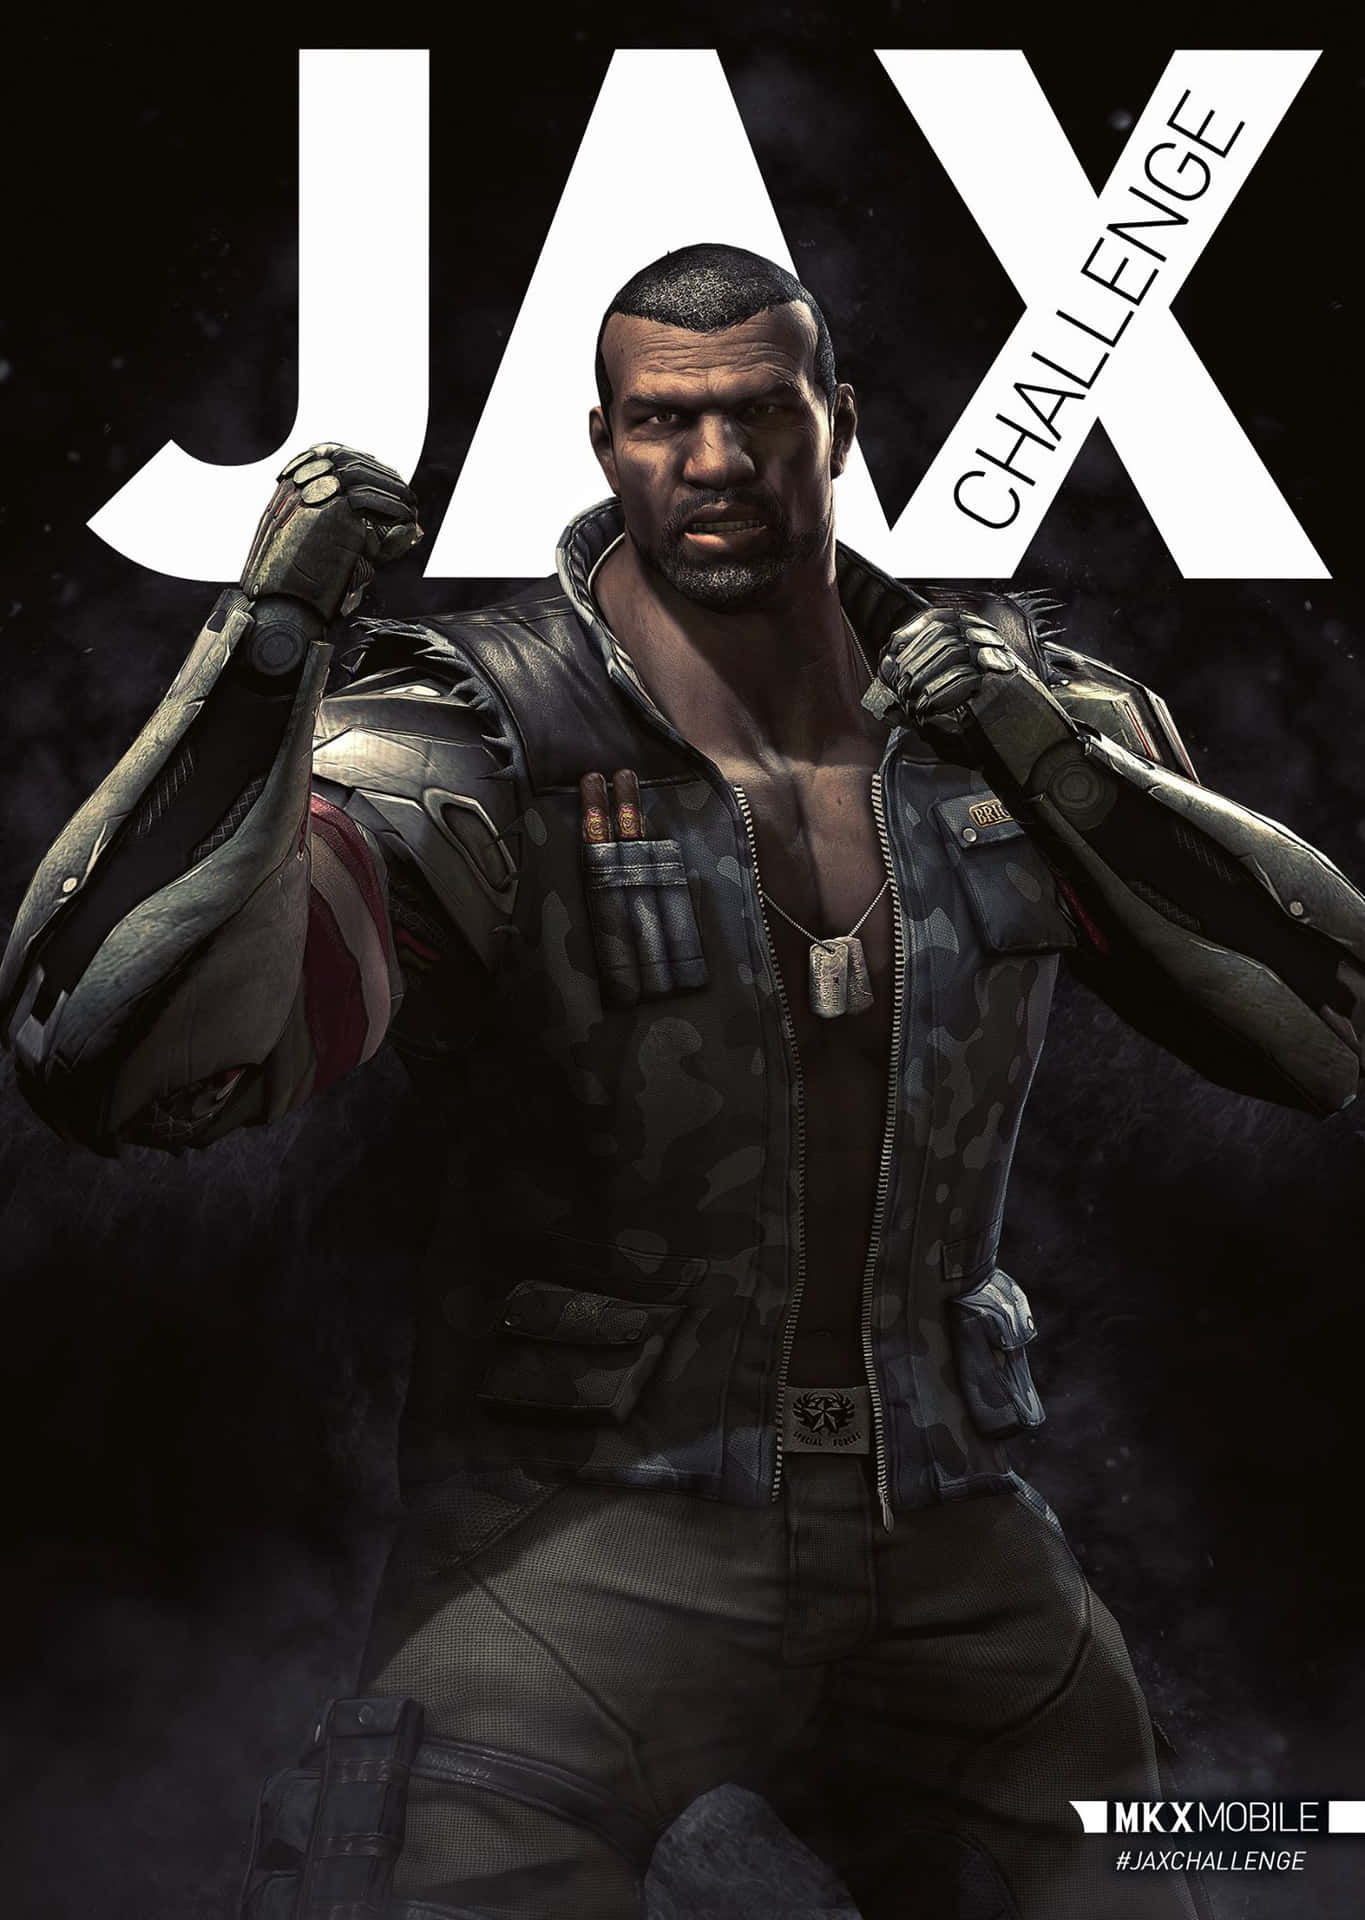 Jax, the powerful Special Forces soldier in action from Mortal Kombat Wallpaper